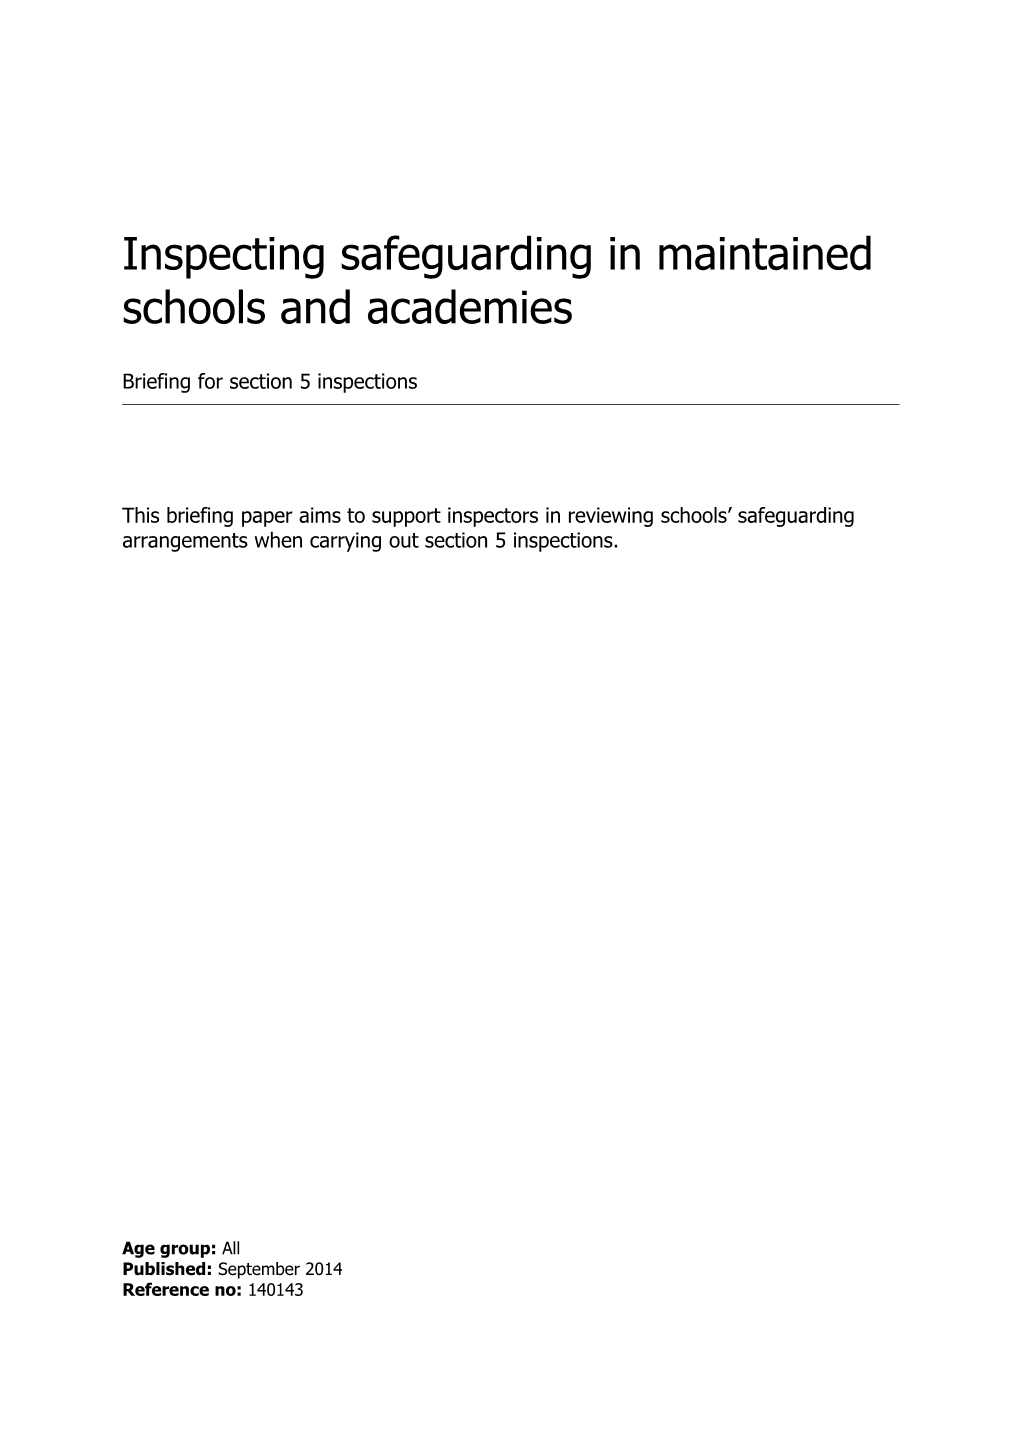 Inspecting Safeguarding in Maintained Schools and Academies